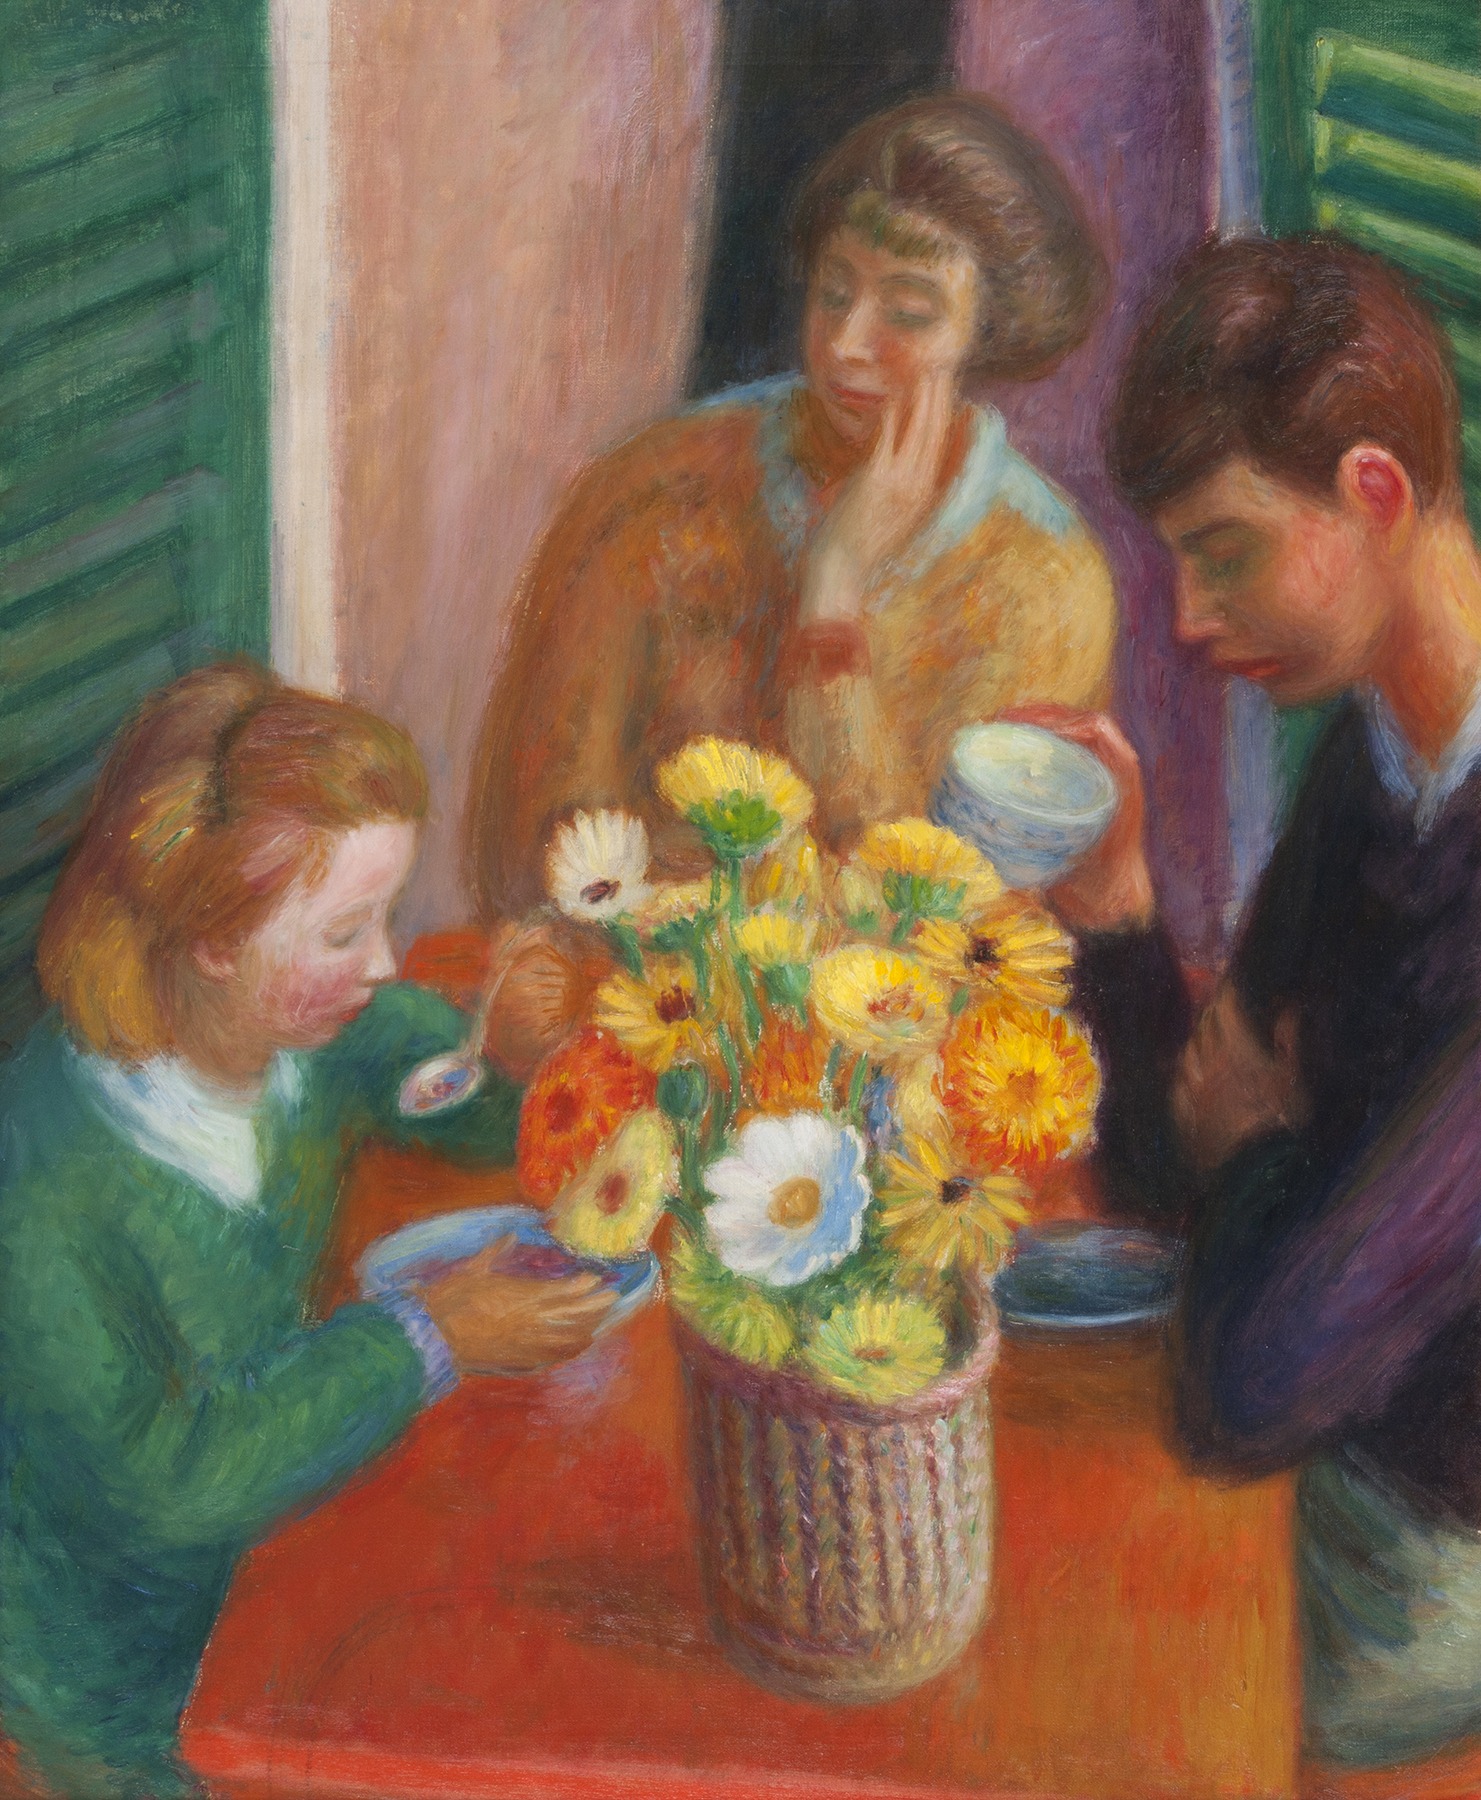 Painting of a family gathered around a table eating with a bouquet of yellow flowers in the middle.